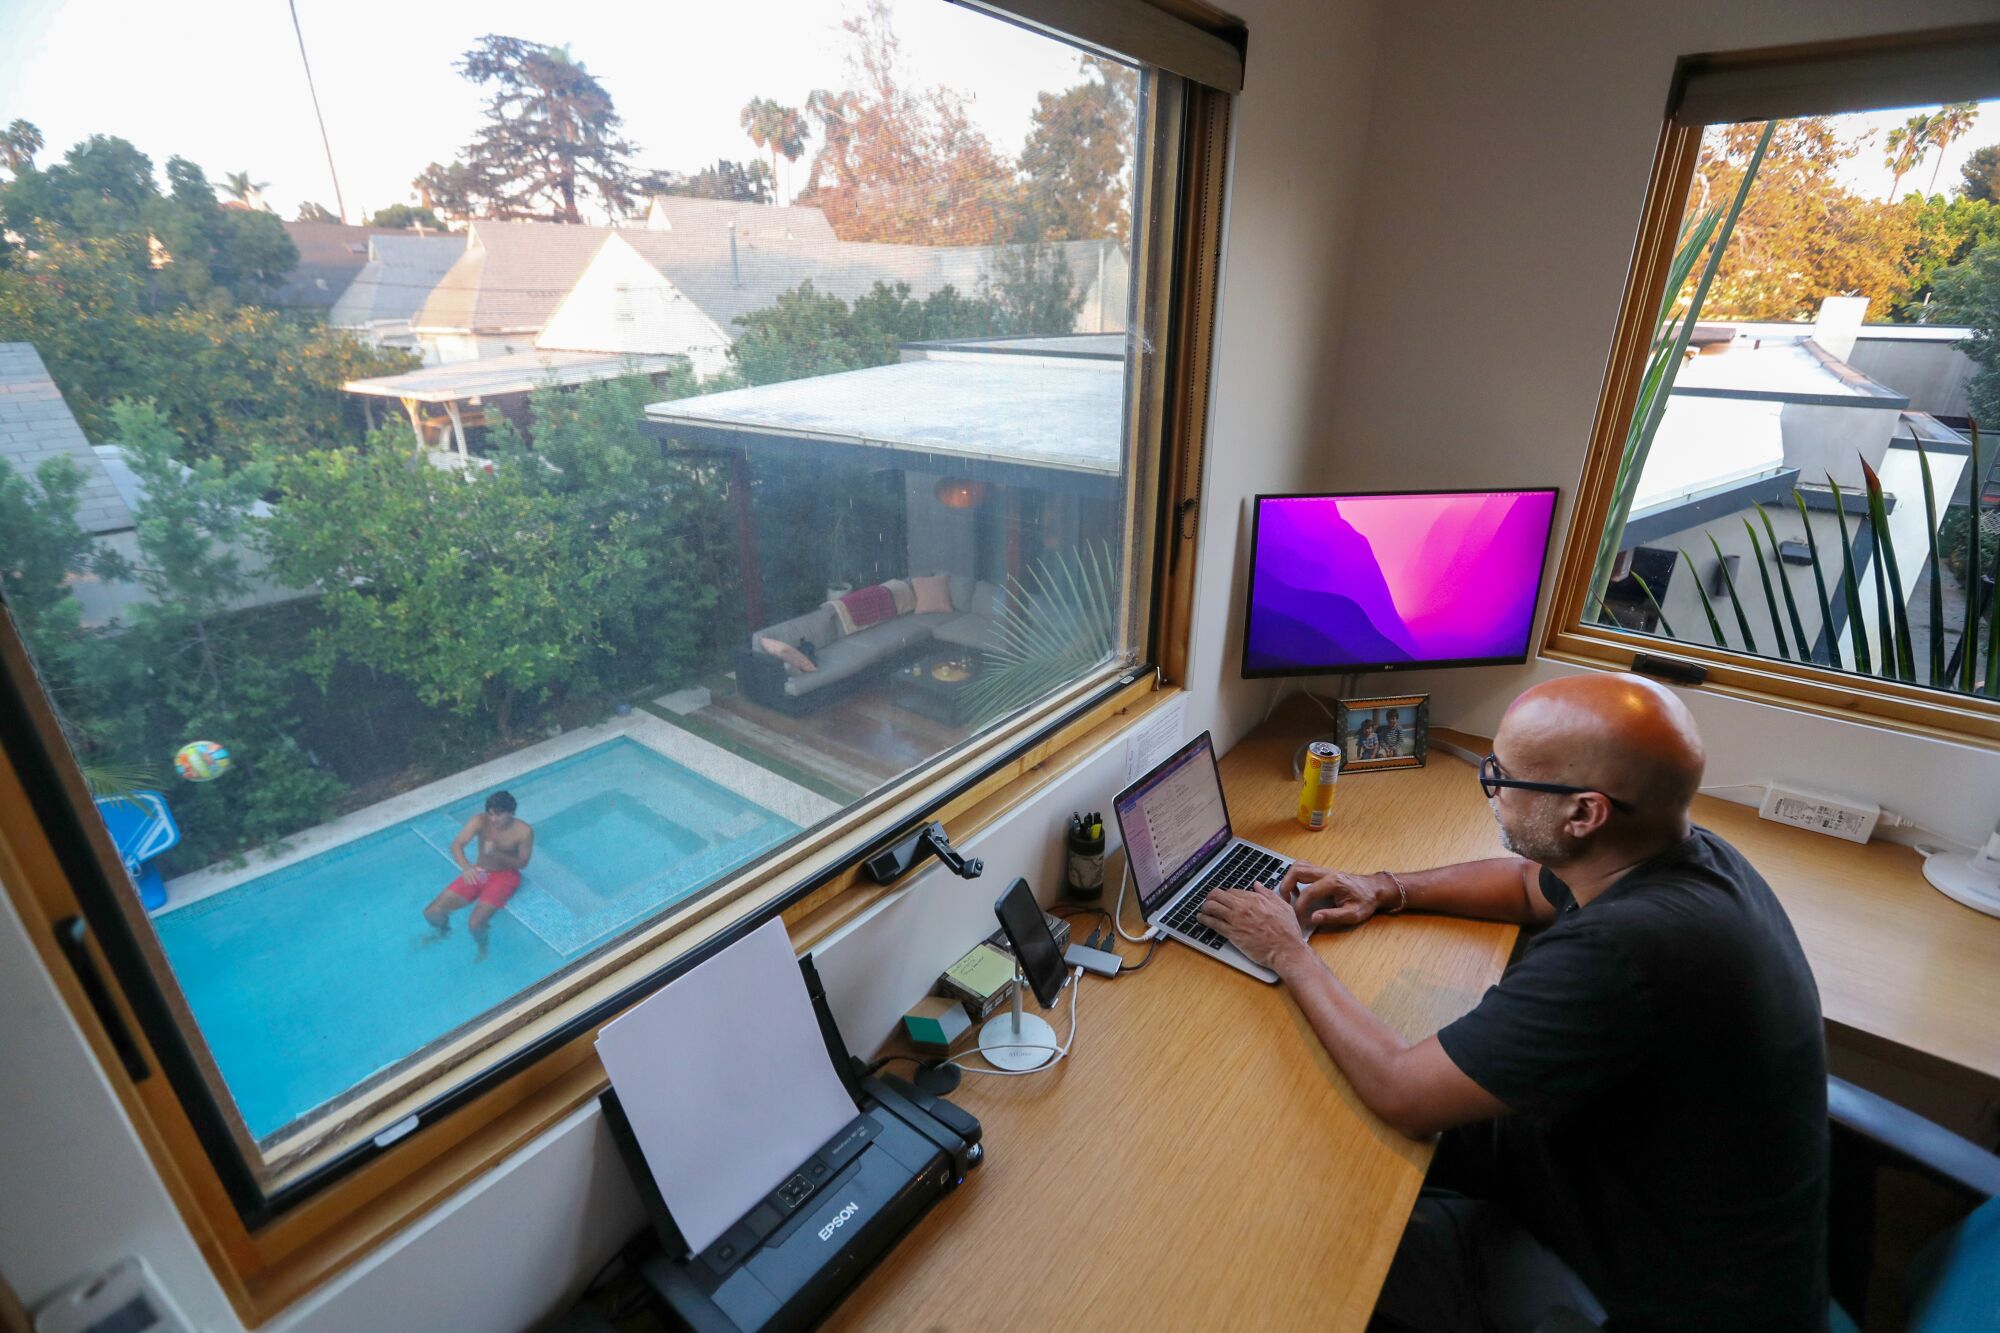 A man works at a desk next to a window that overlooks the backyard swimming pool.